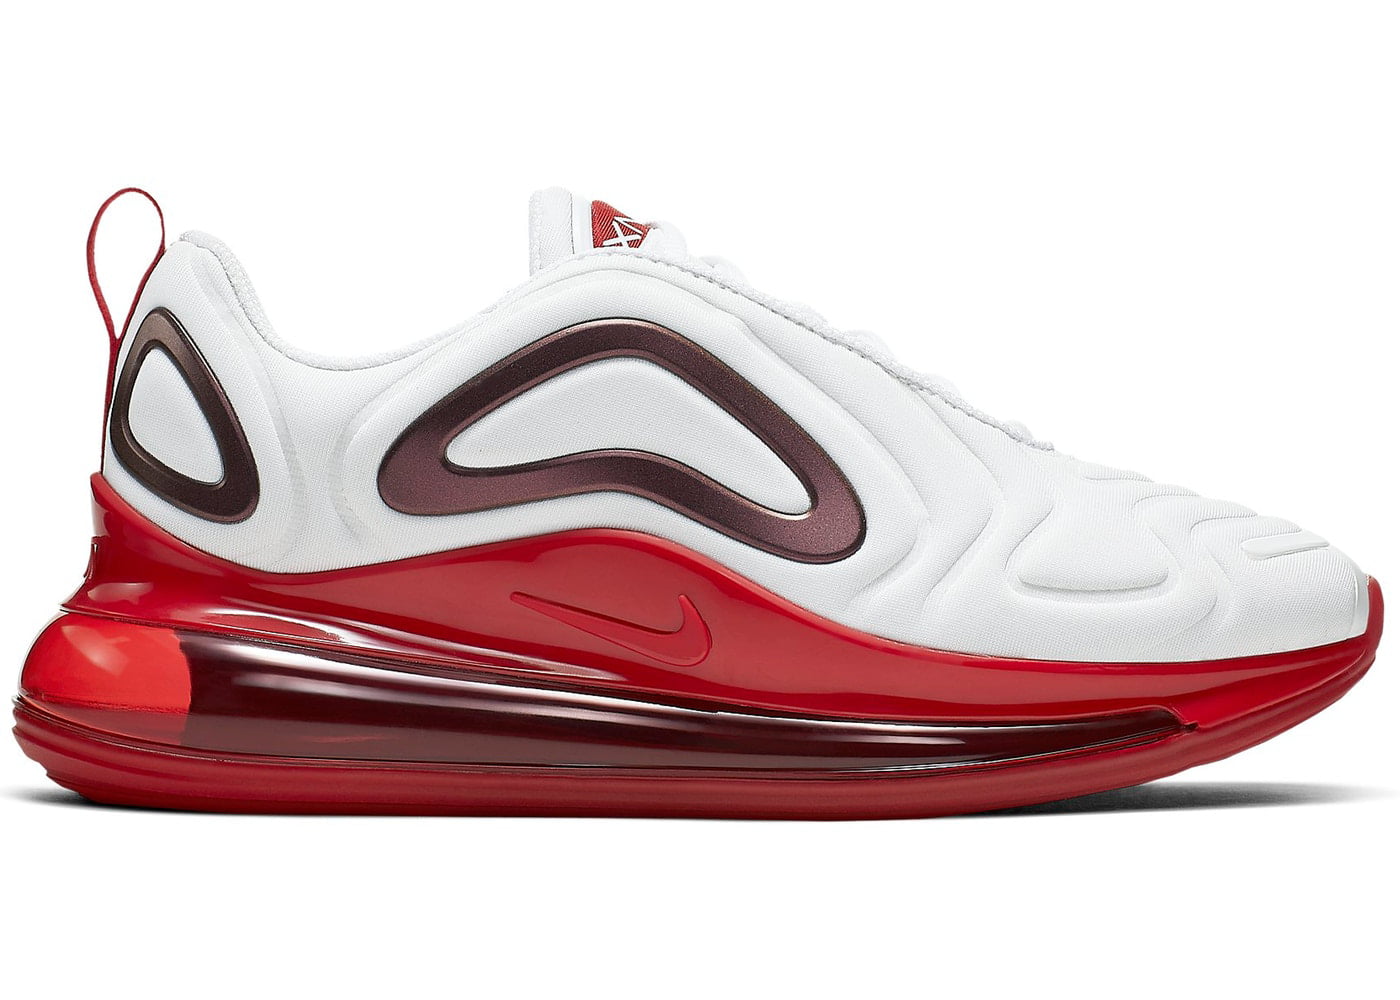 (WMNS) Nike Air Max 720 SE Track Red/Barely Rose CD0683-600